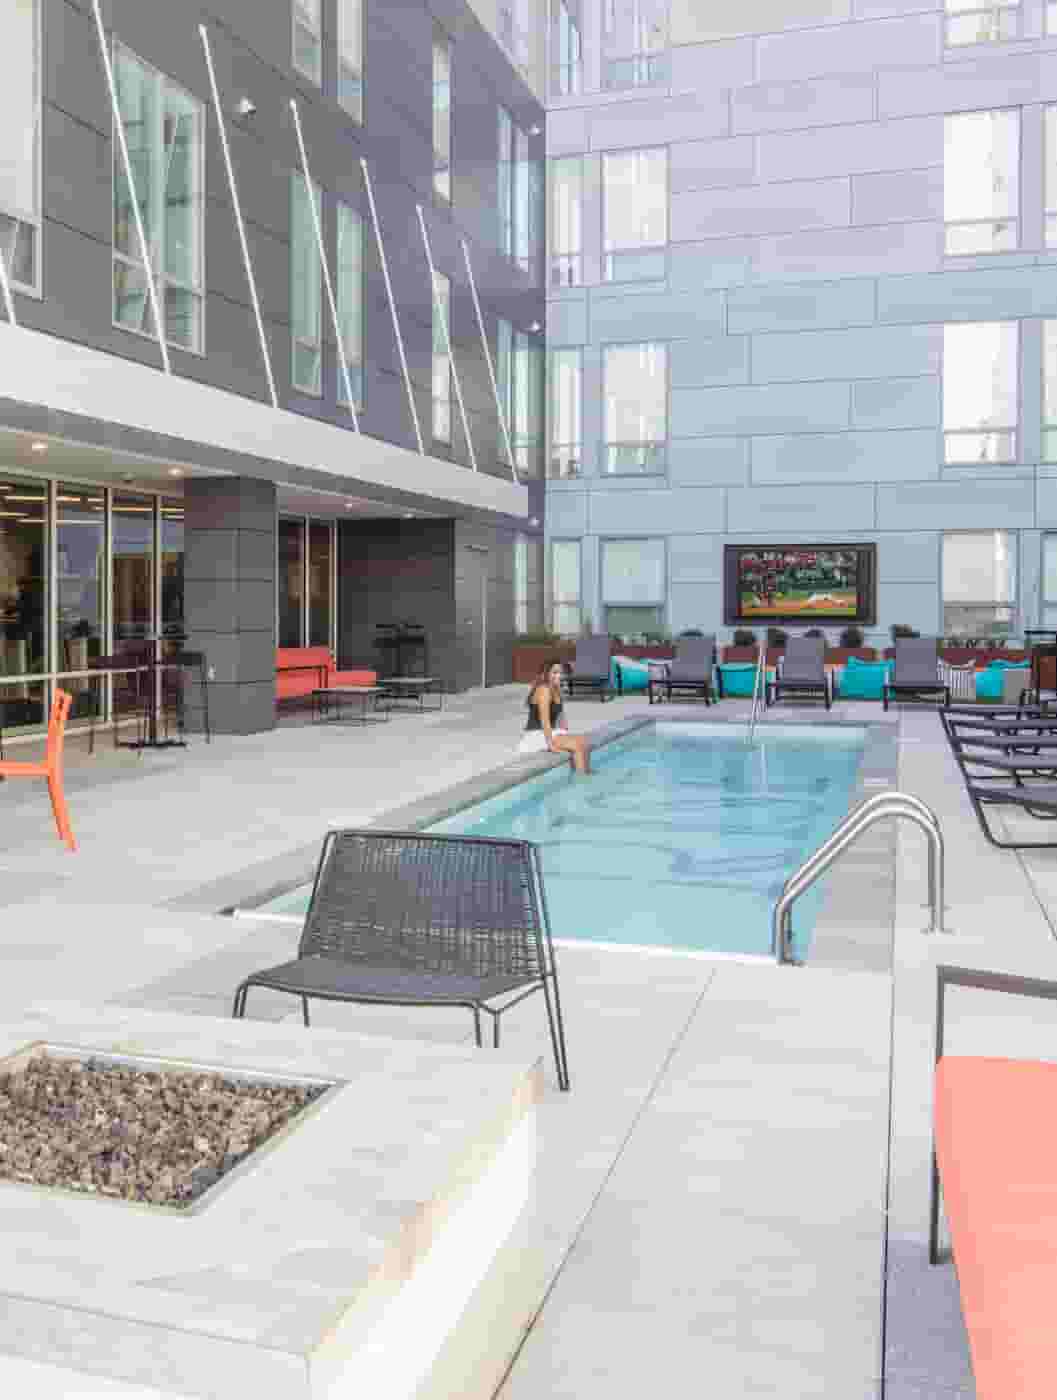 Student swimming pool and outdoor lounge